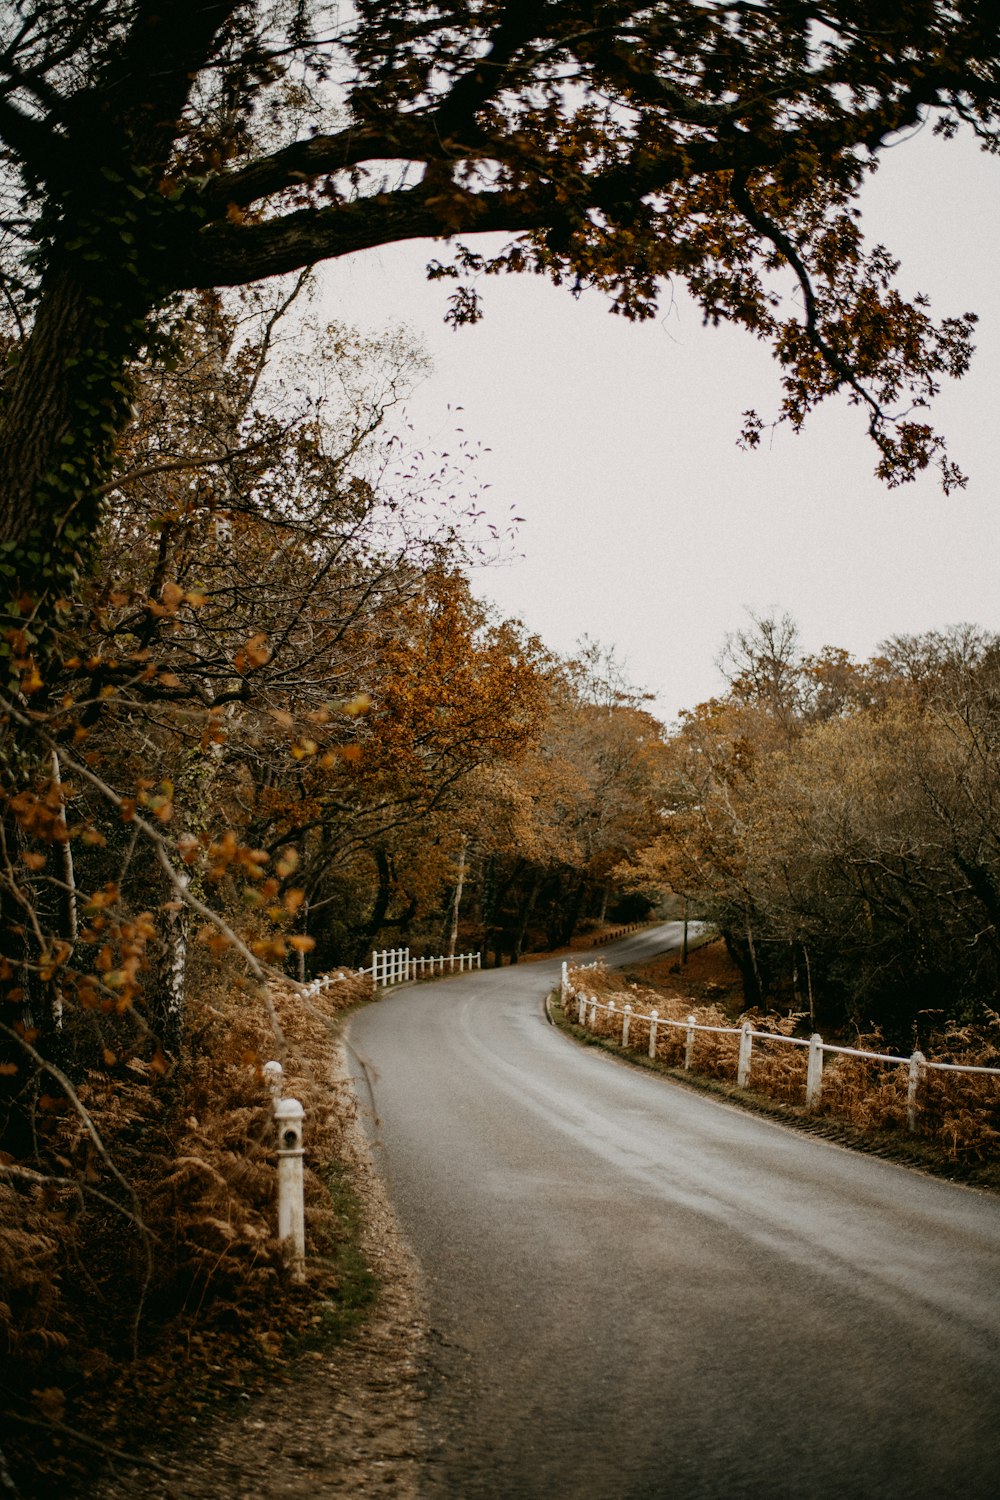 a winding road with a fence and trees in the background